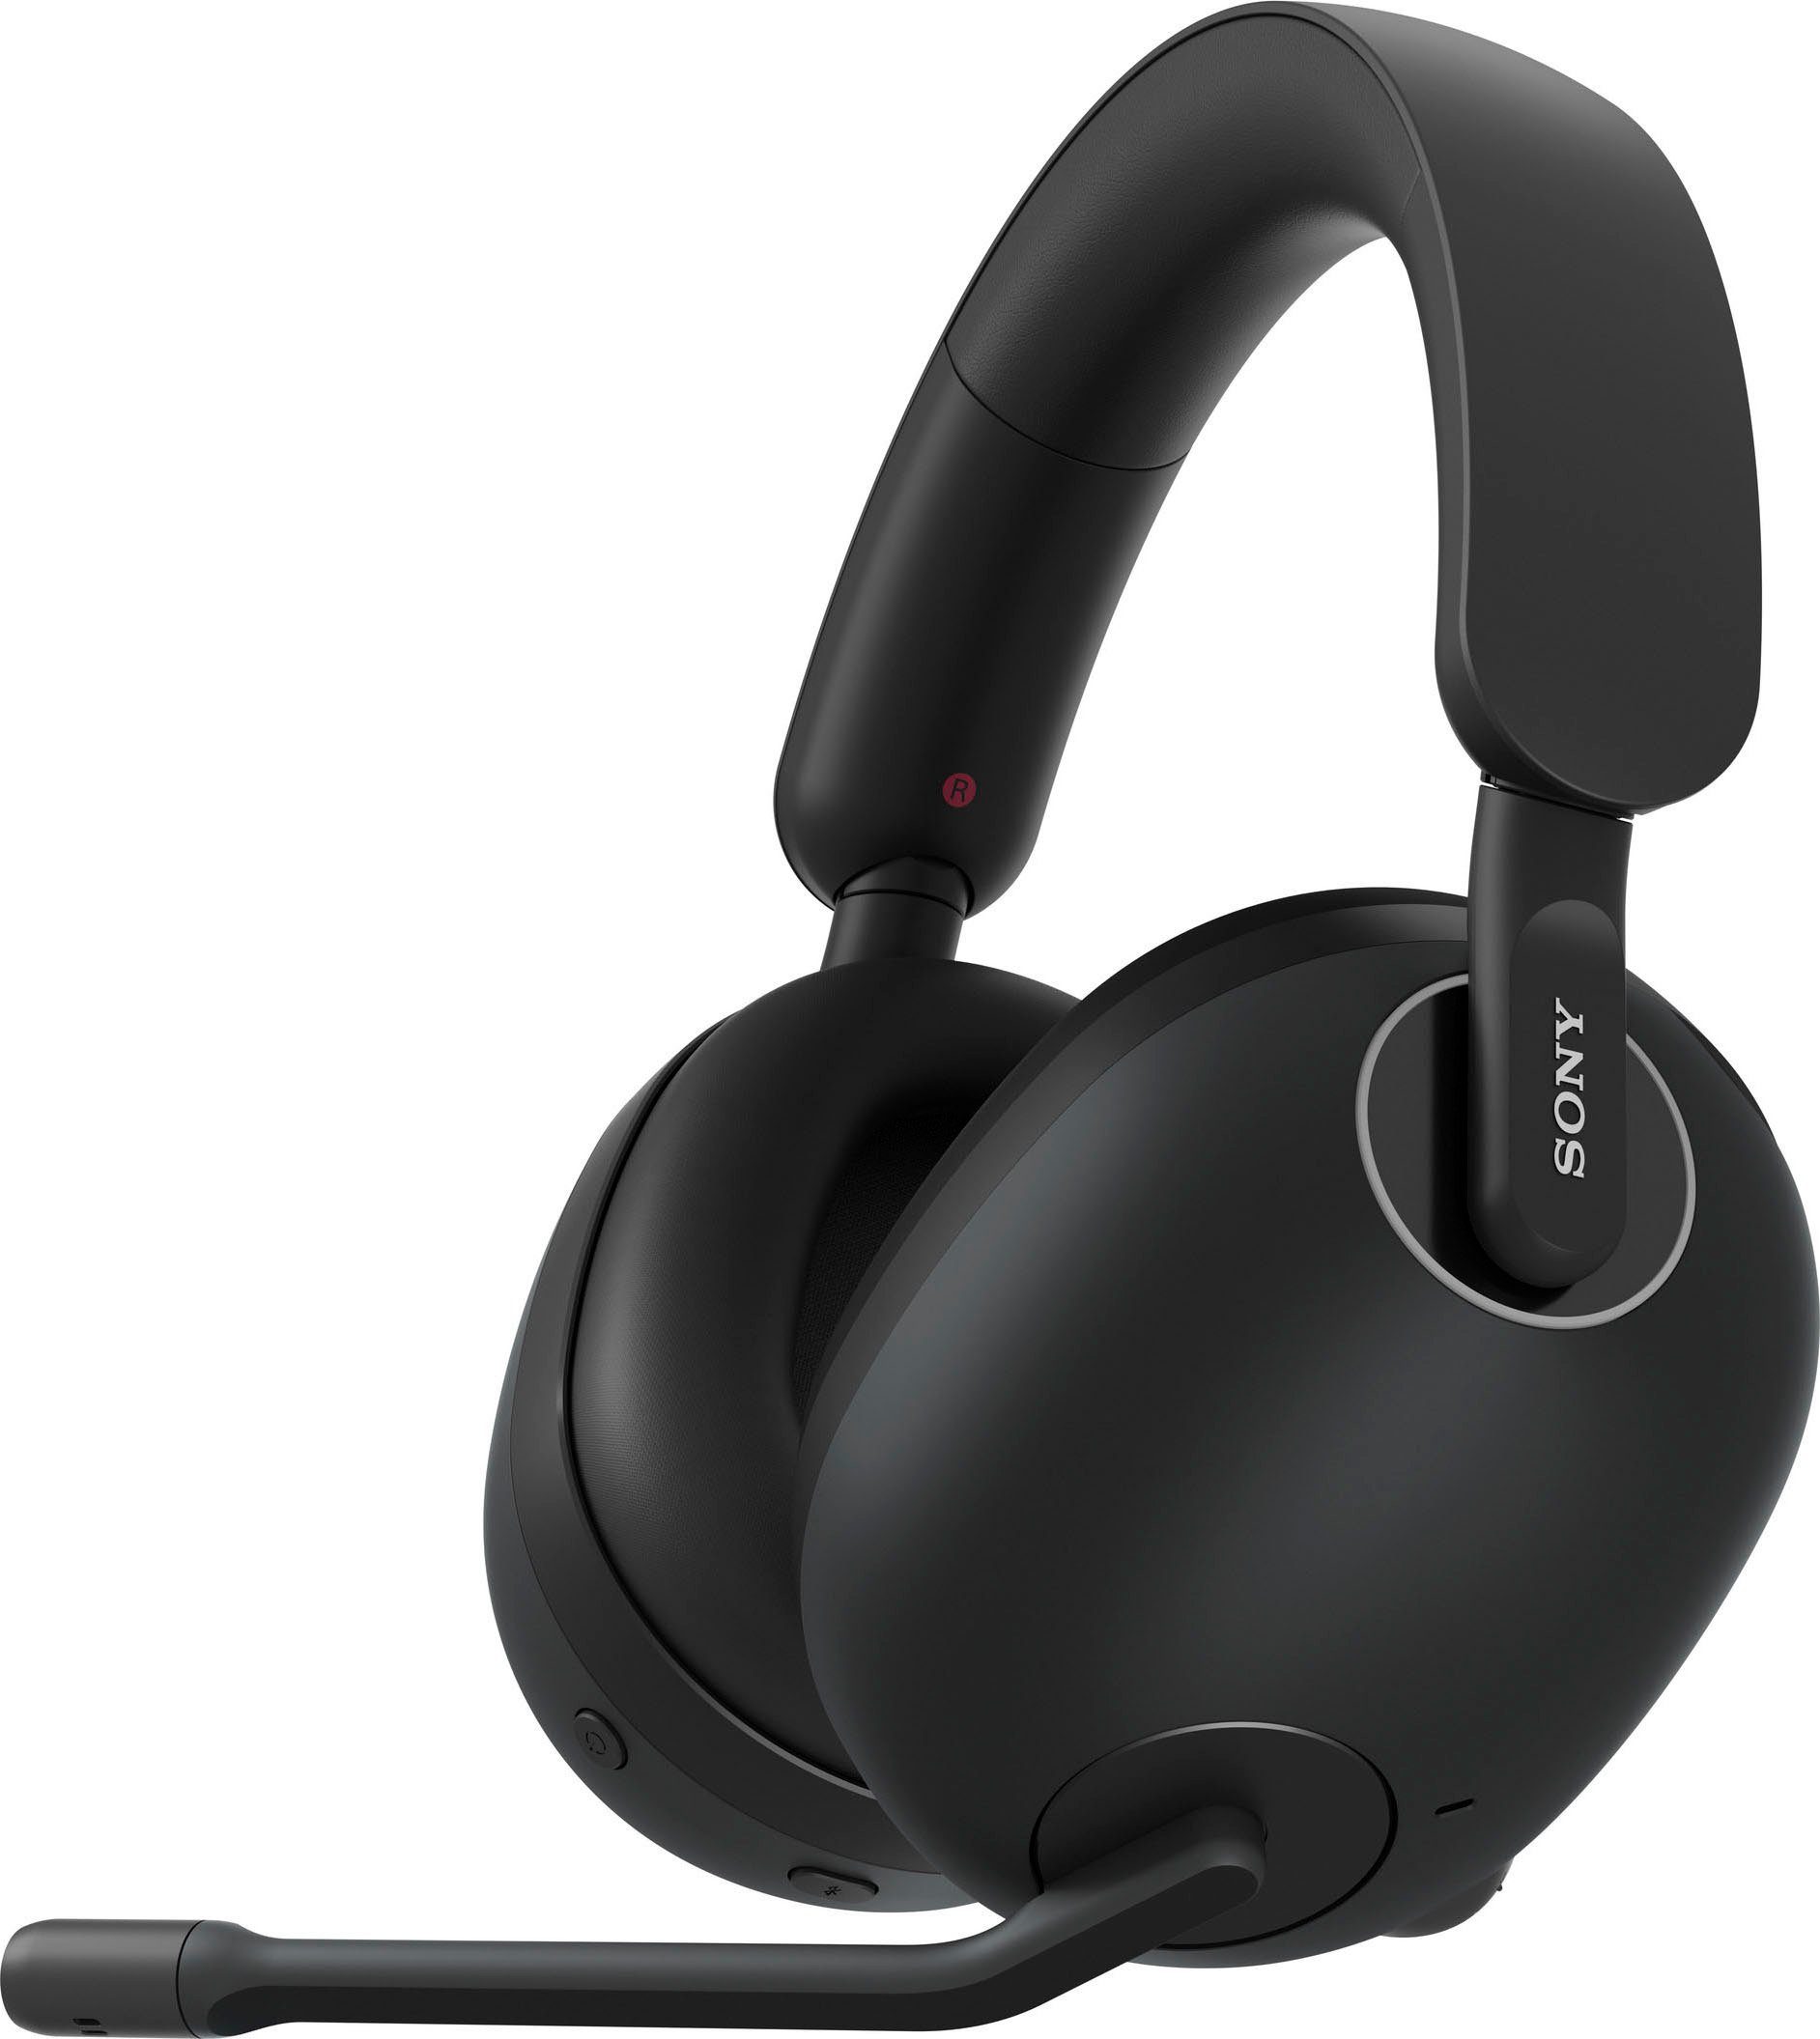 Sony INZONE H9 Gaming-Headset (Active Noise Cancelling (ANC), LED Ladestandsanzeige, Quick Attention Modus, Bluetooth, Wireless) schwarz